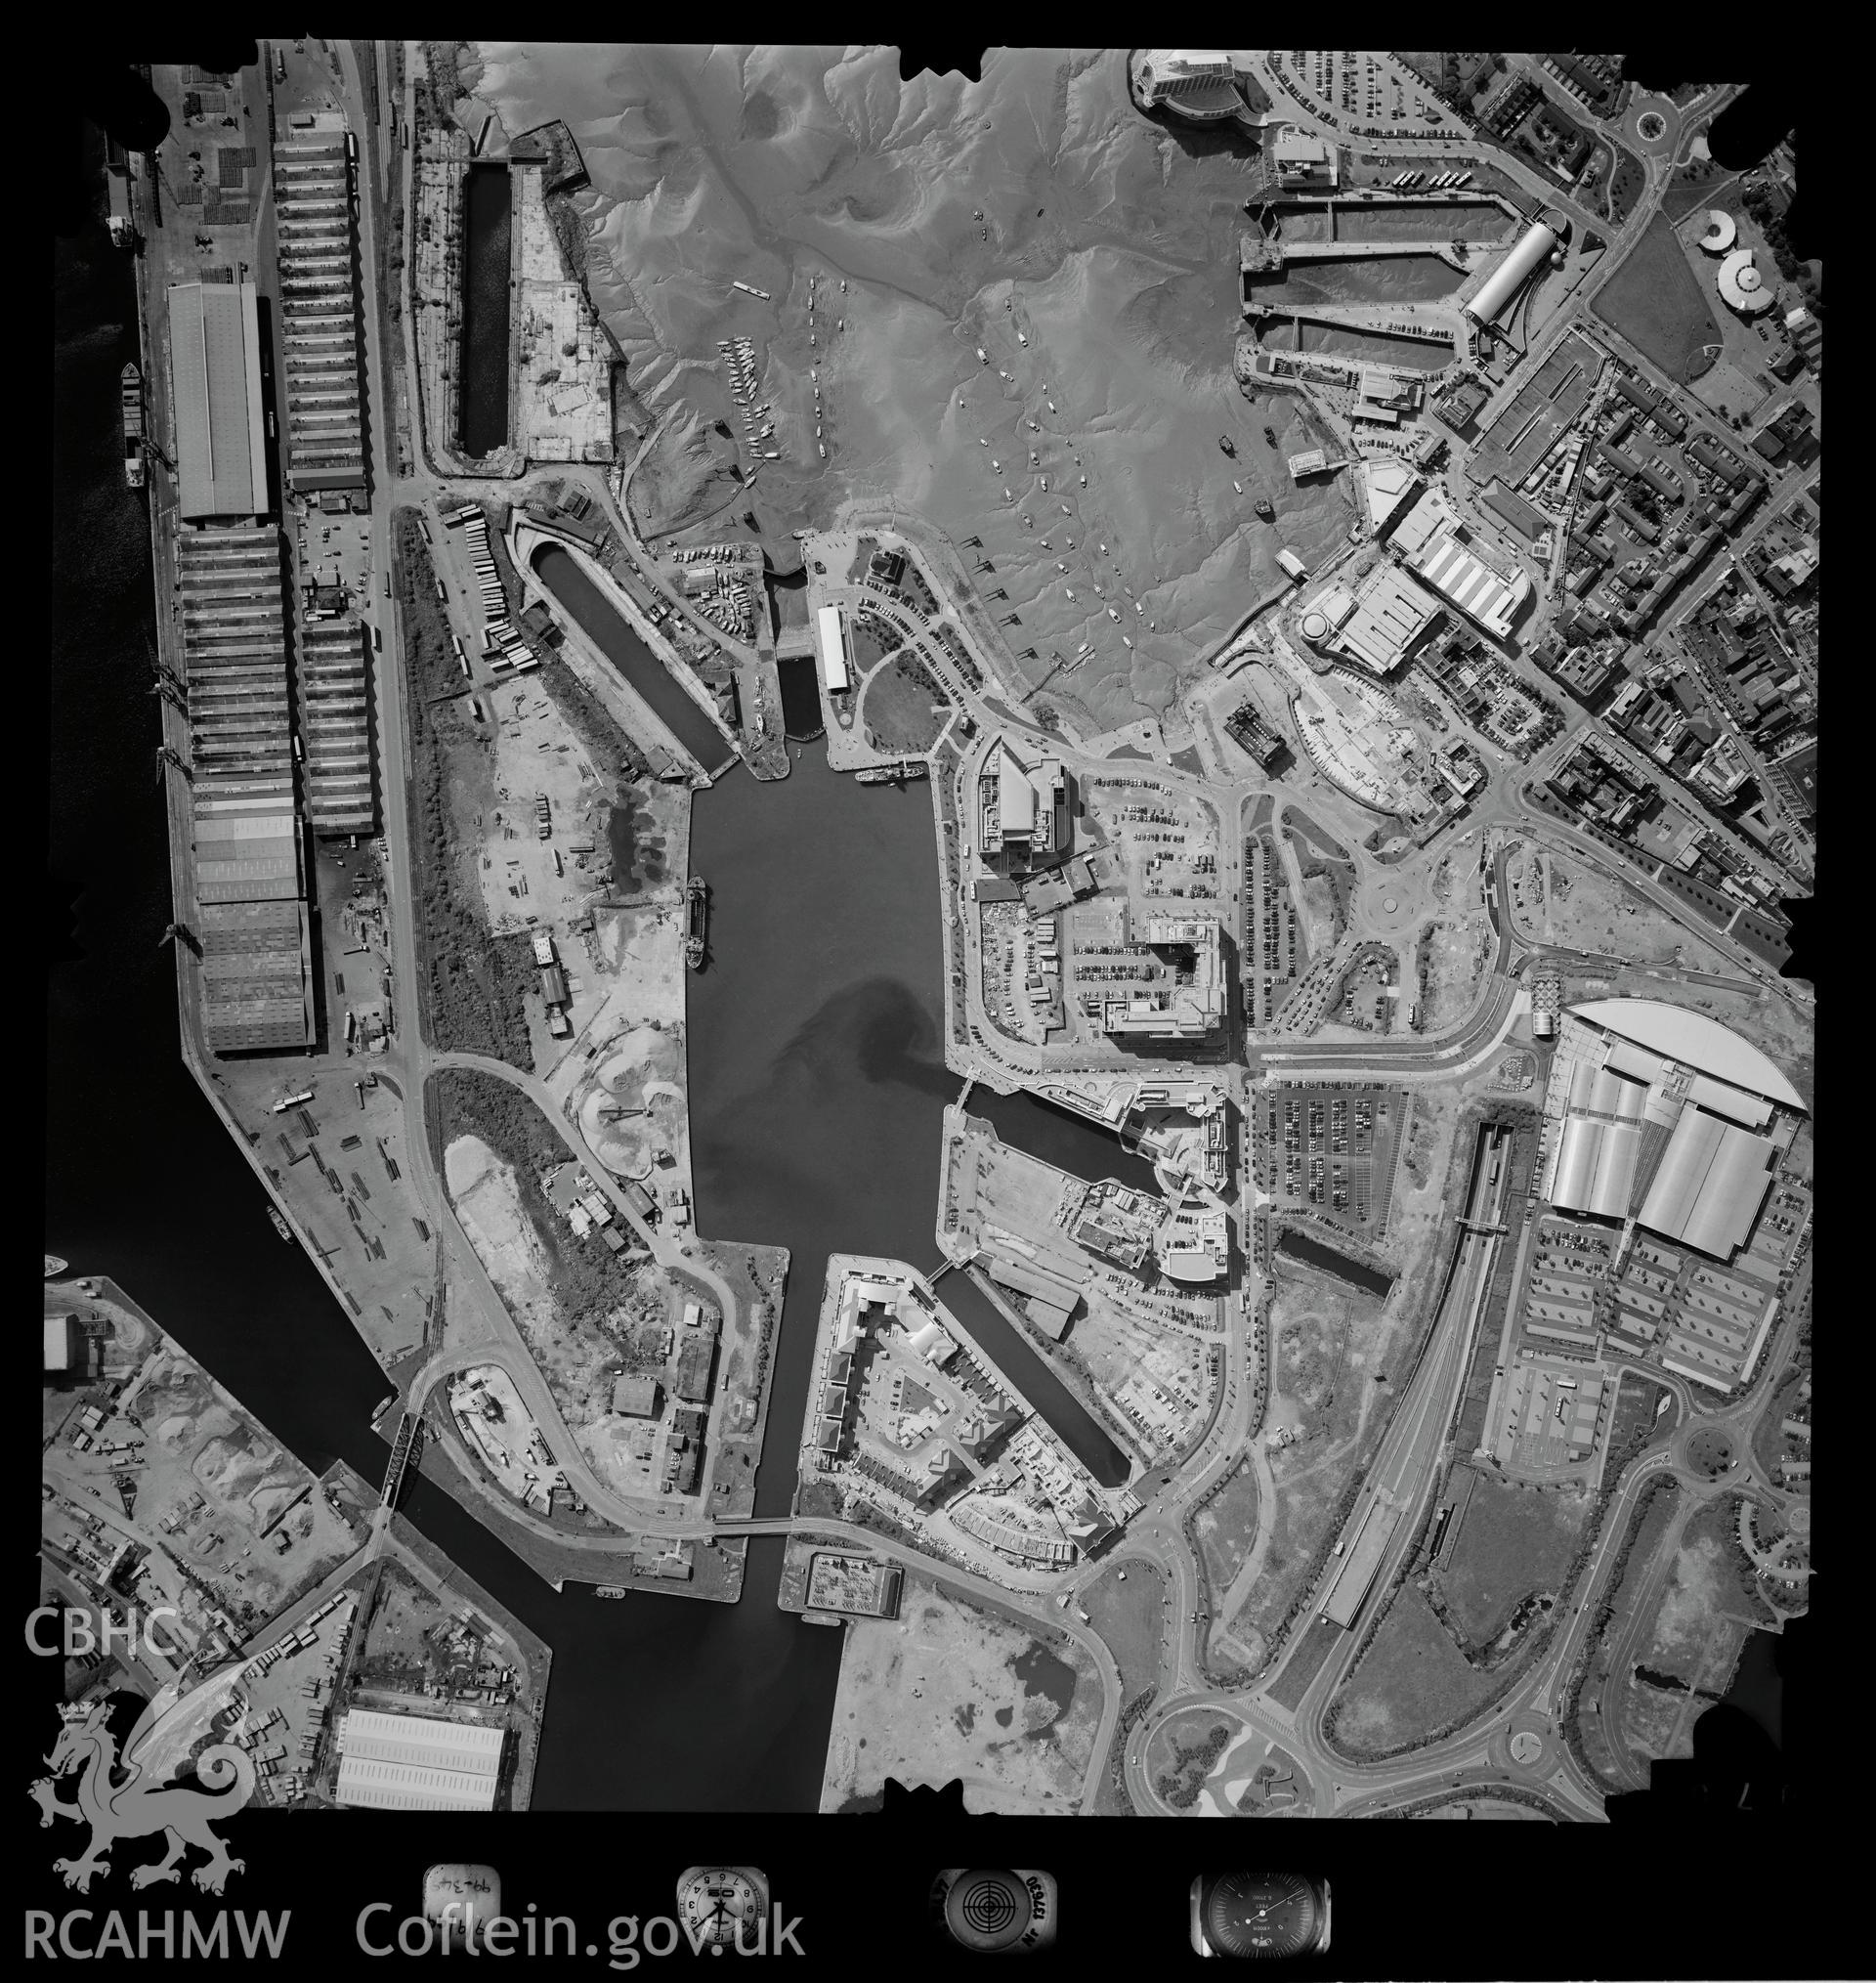 Digitized copy of an aerial photograph showing Cardiff Bay area, taken by Ordnance Survey, 1999.